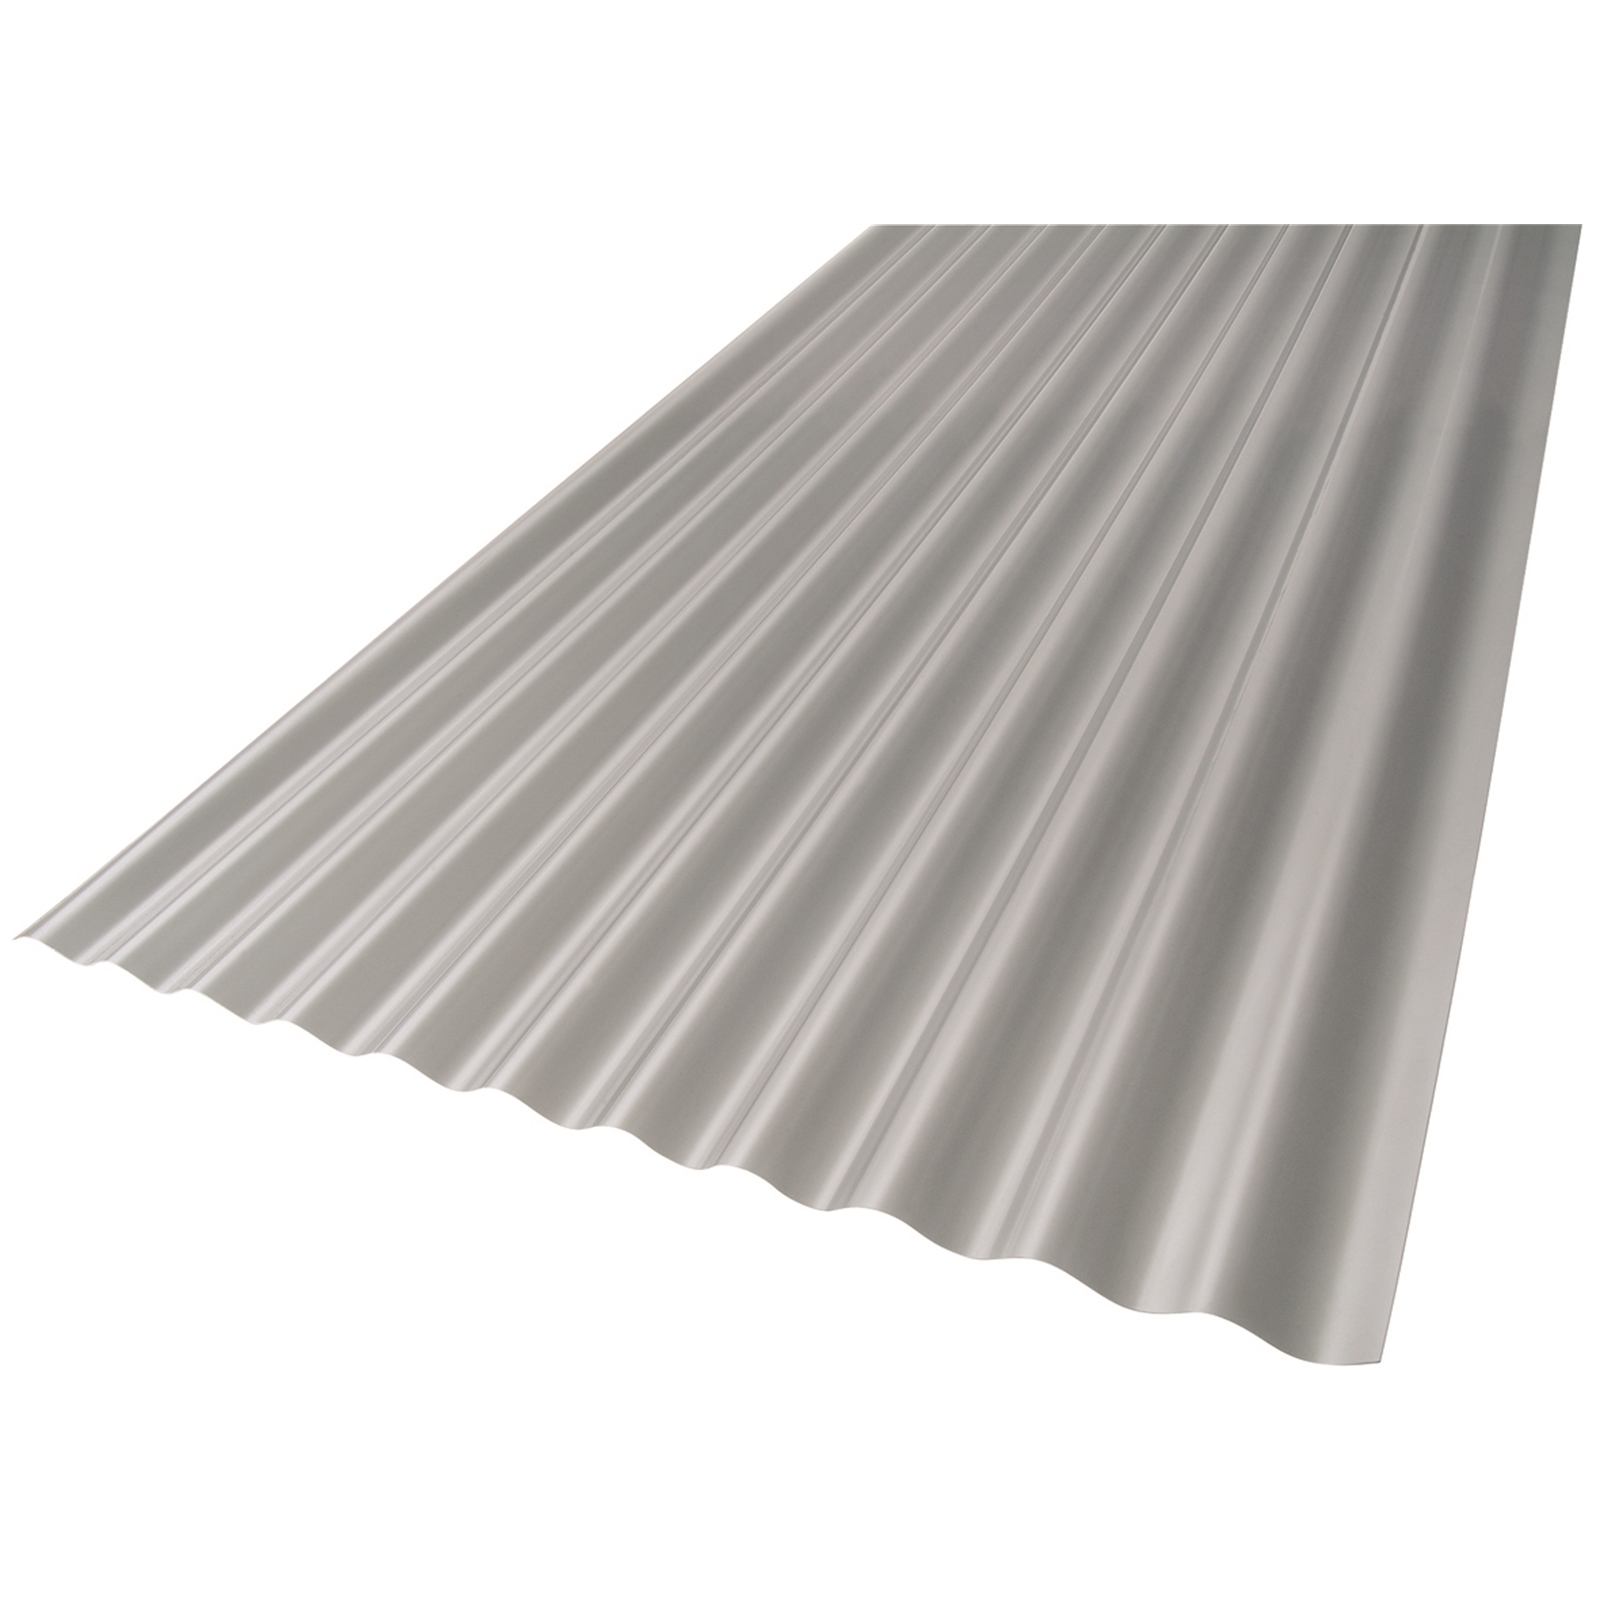 Suntuf SolarSmart 3.6m Diffussed Grey Polycarbonate Roofing